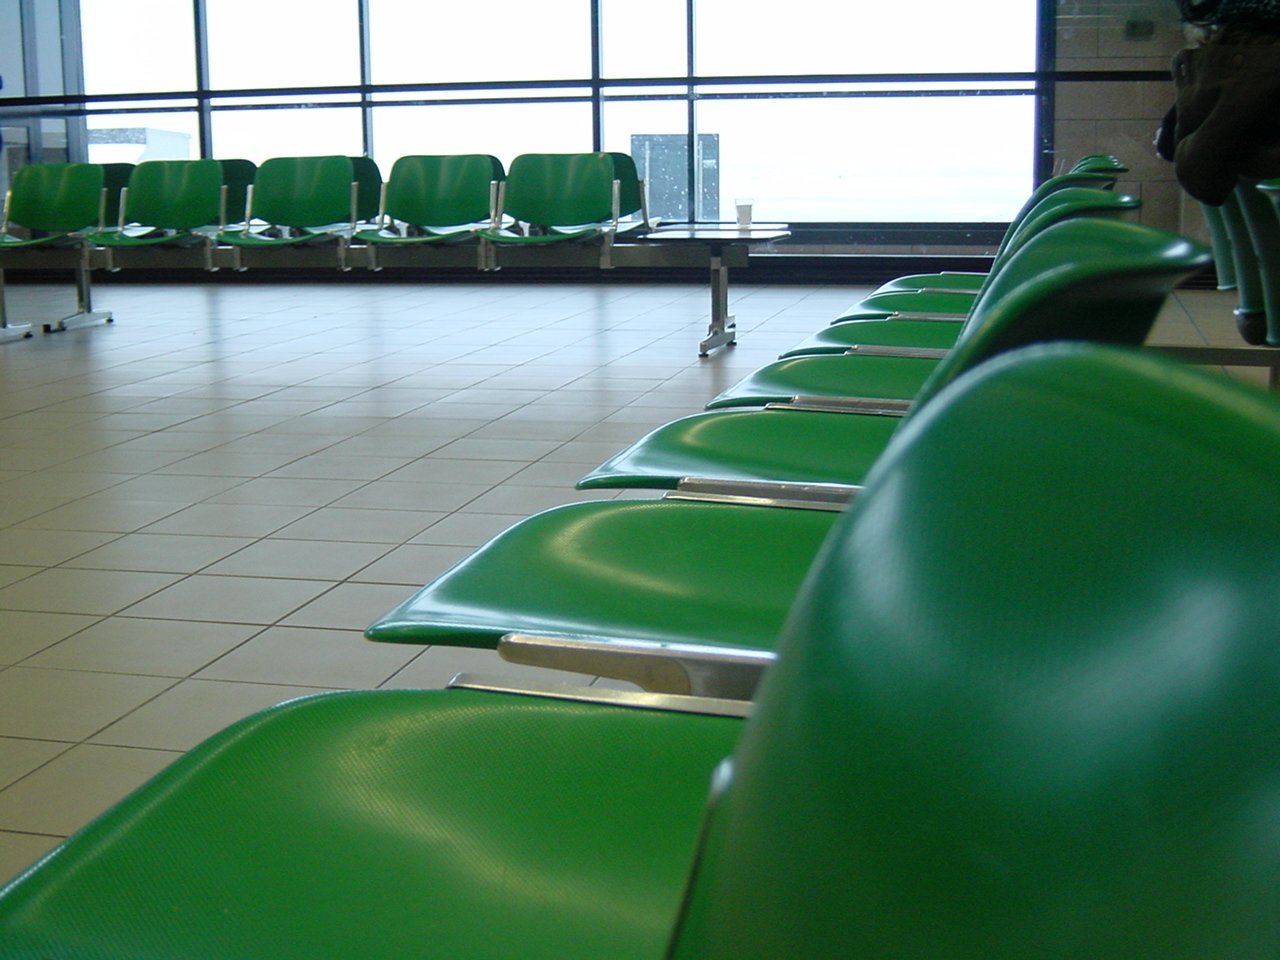 a line of empty chairs in an airport